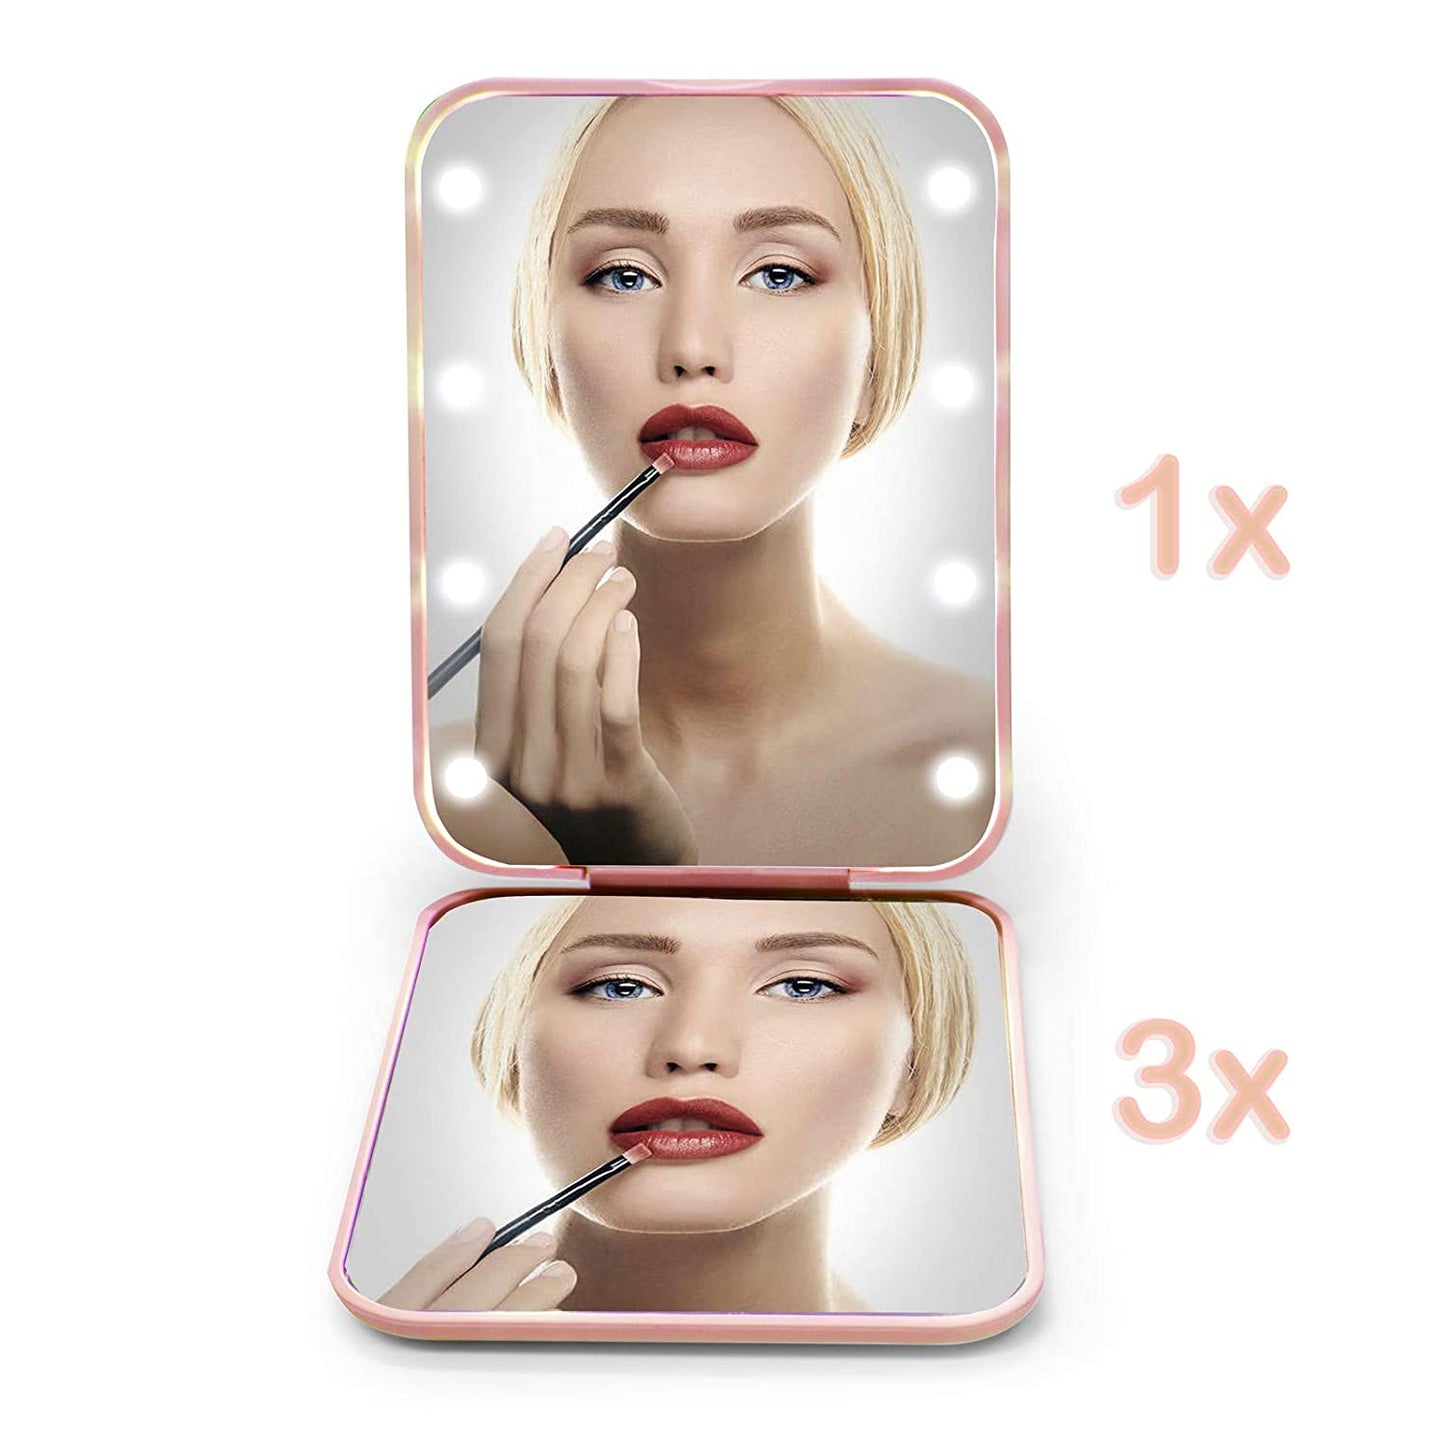 LED lighted Pocket Mirror, 1X/3X Magnification